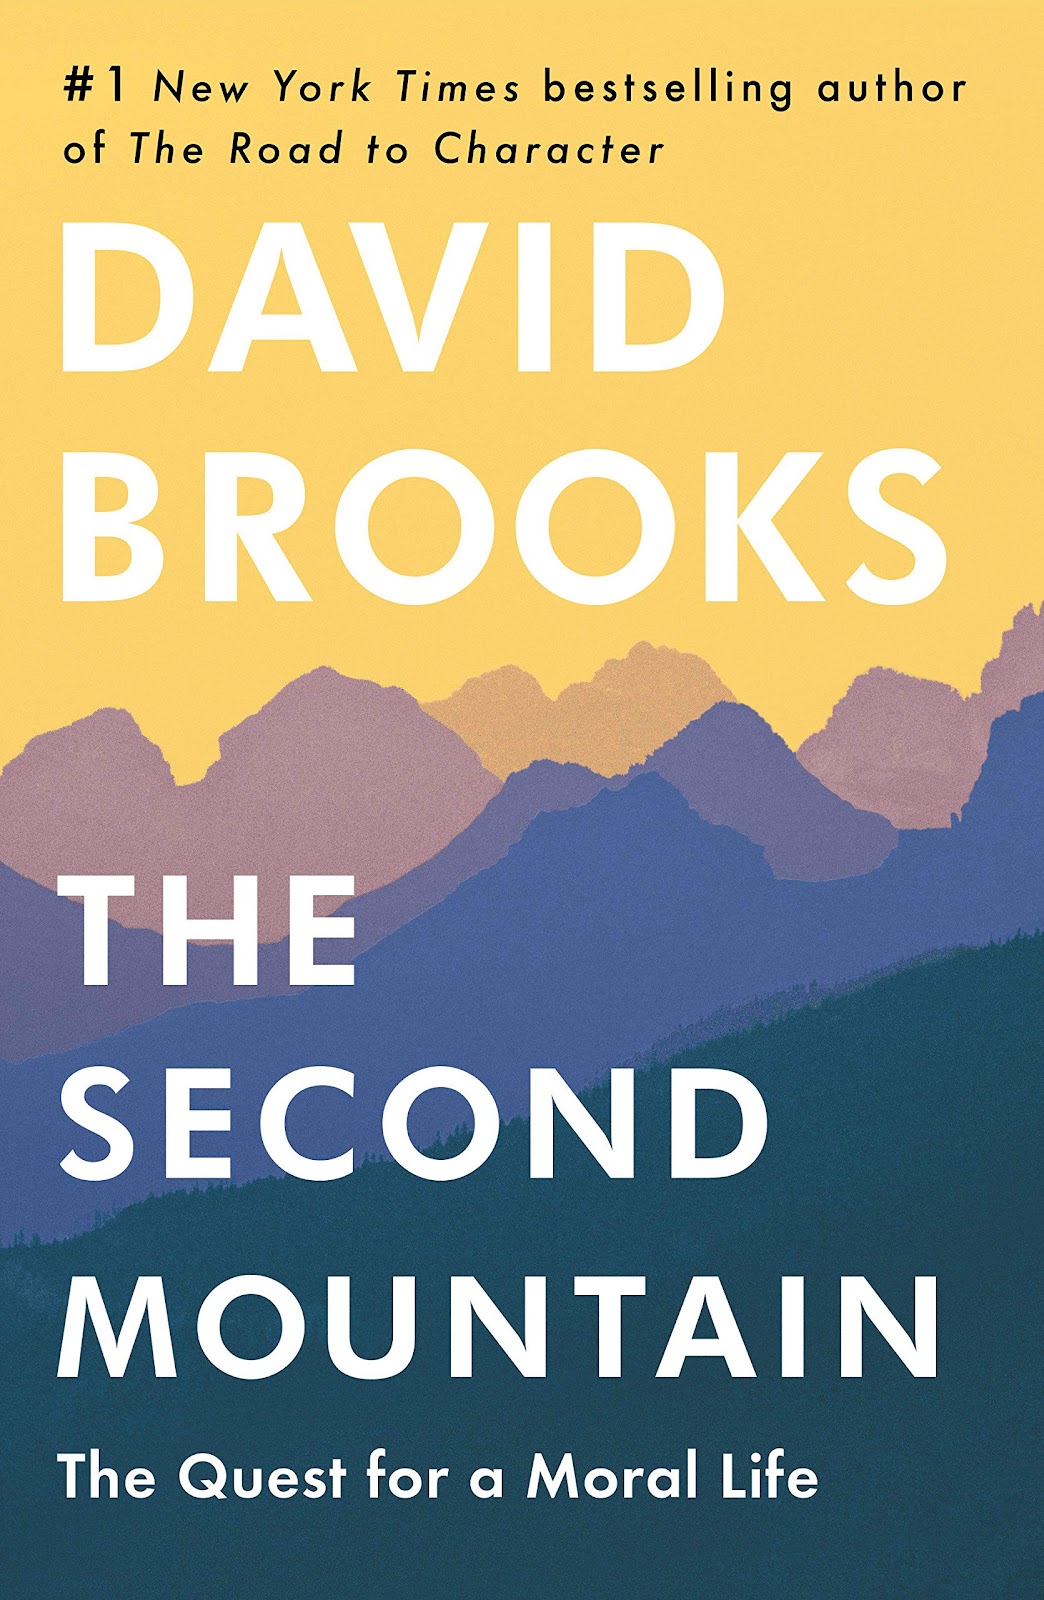 Book 'The Second Mountain'